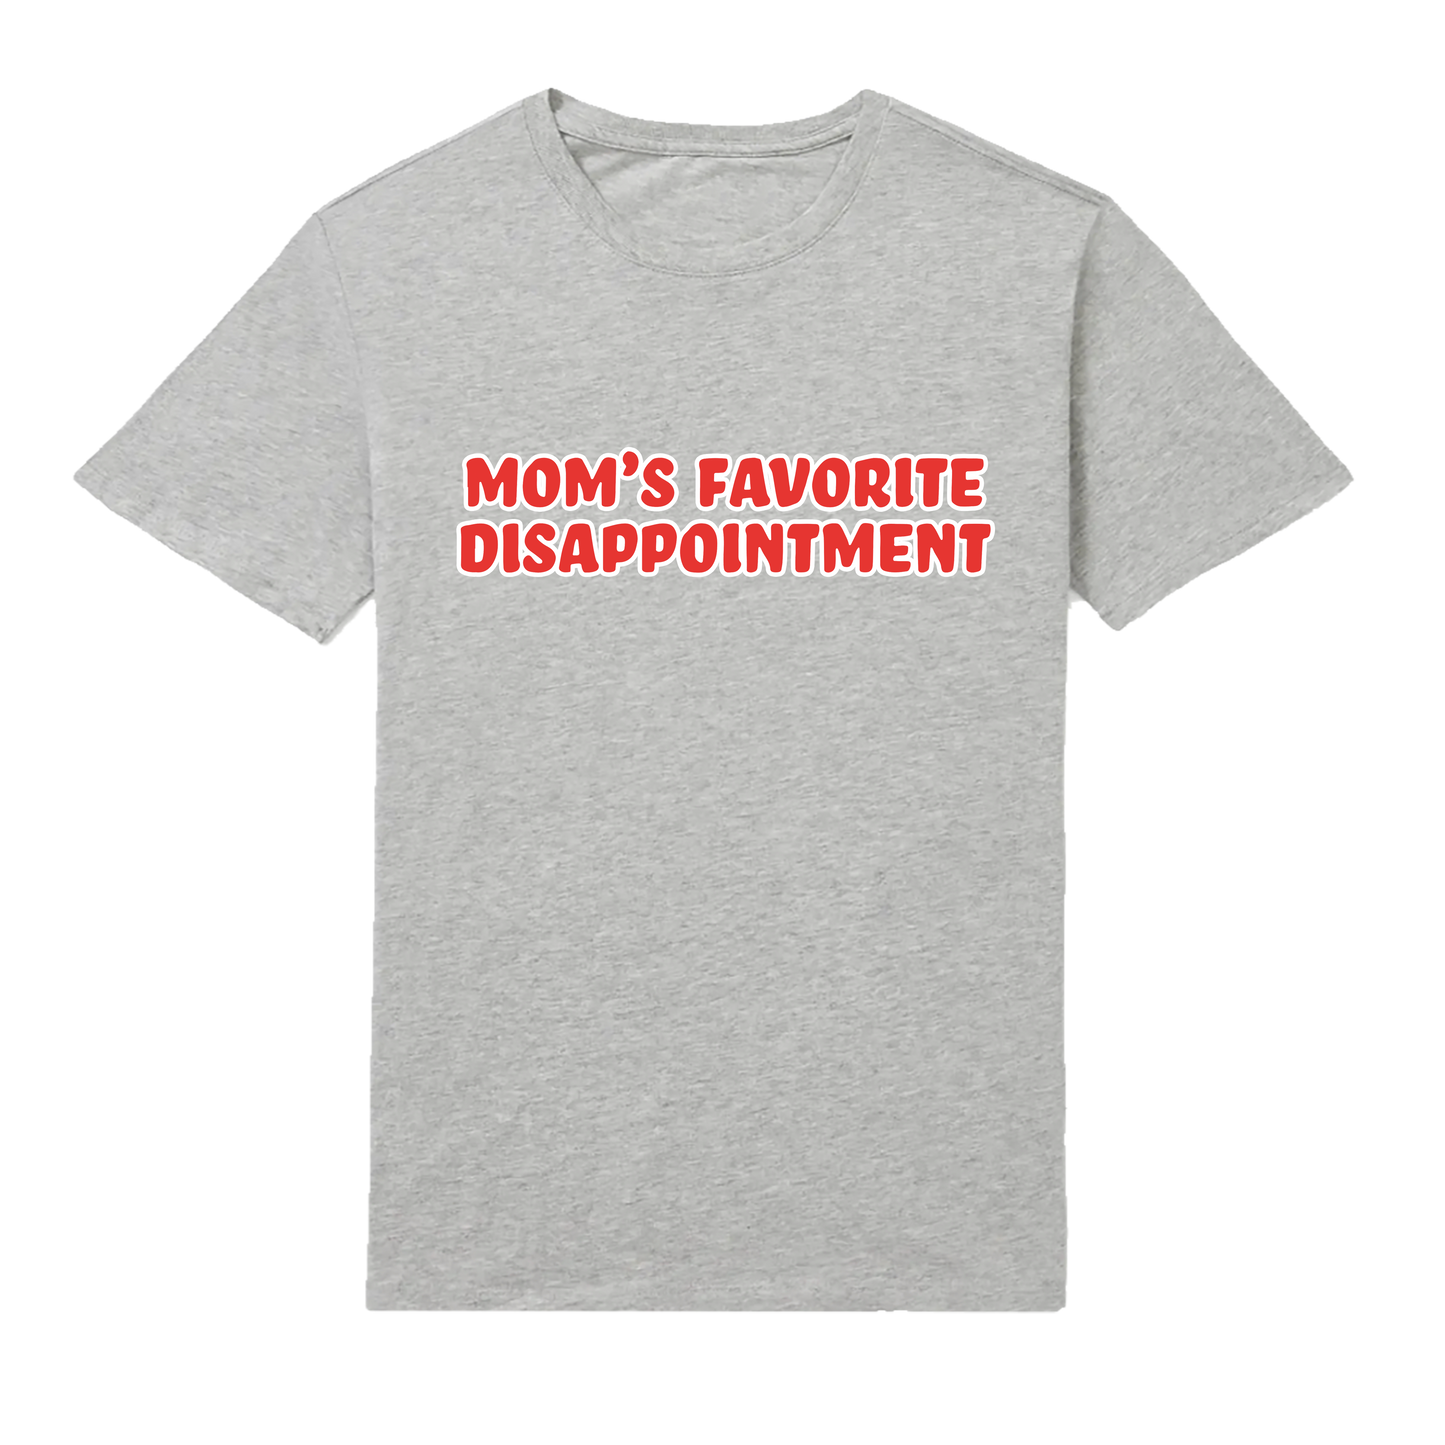 Mom's Favorite Disappointment T-Shirt